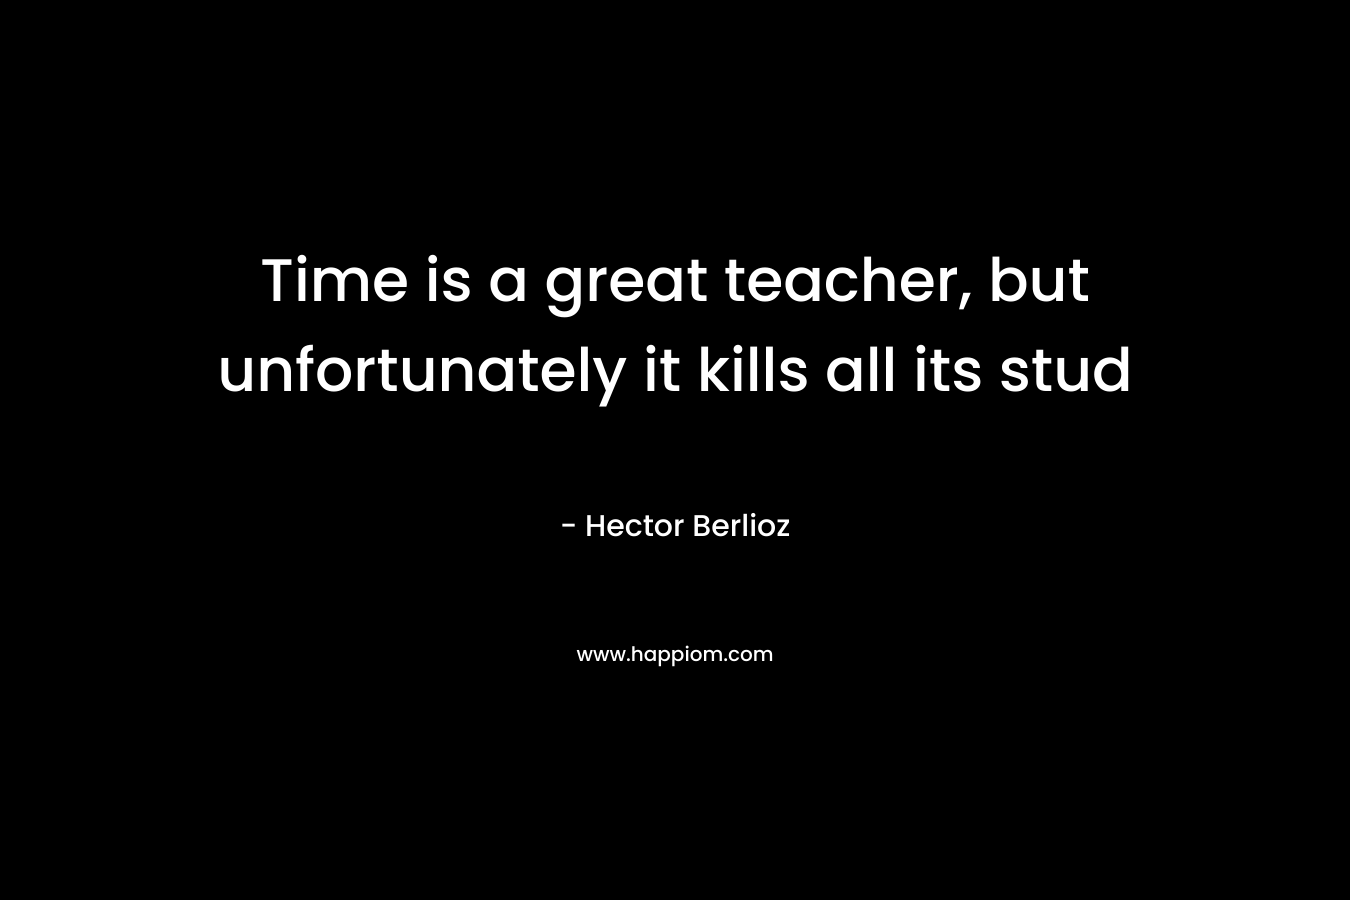 Time is a great teacher, but unfortunately it kills all its stud – Hector Berlioz